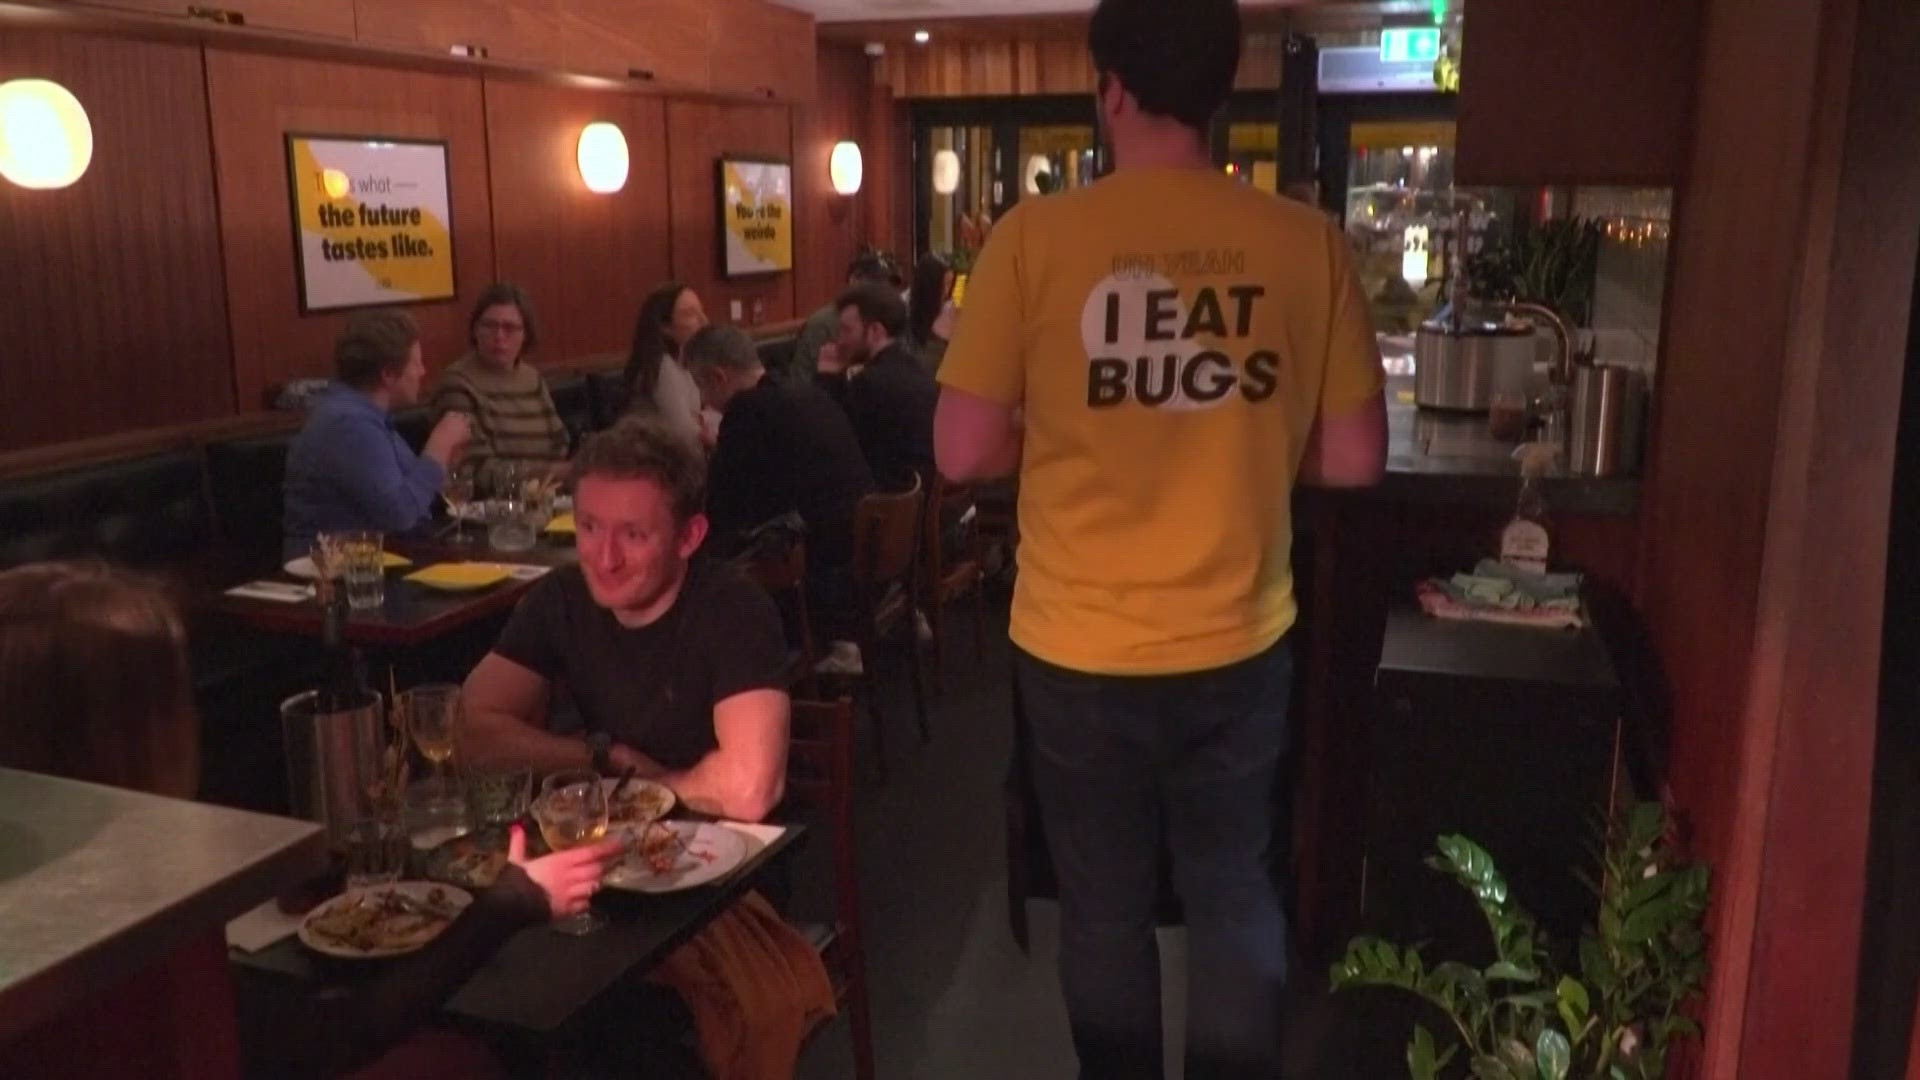 Yum-Bug in London is the world's first bug-based small plate restaurant.